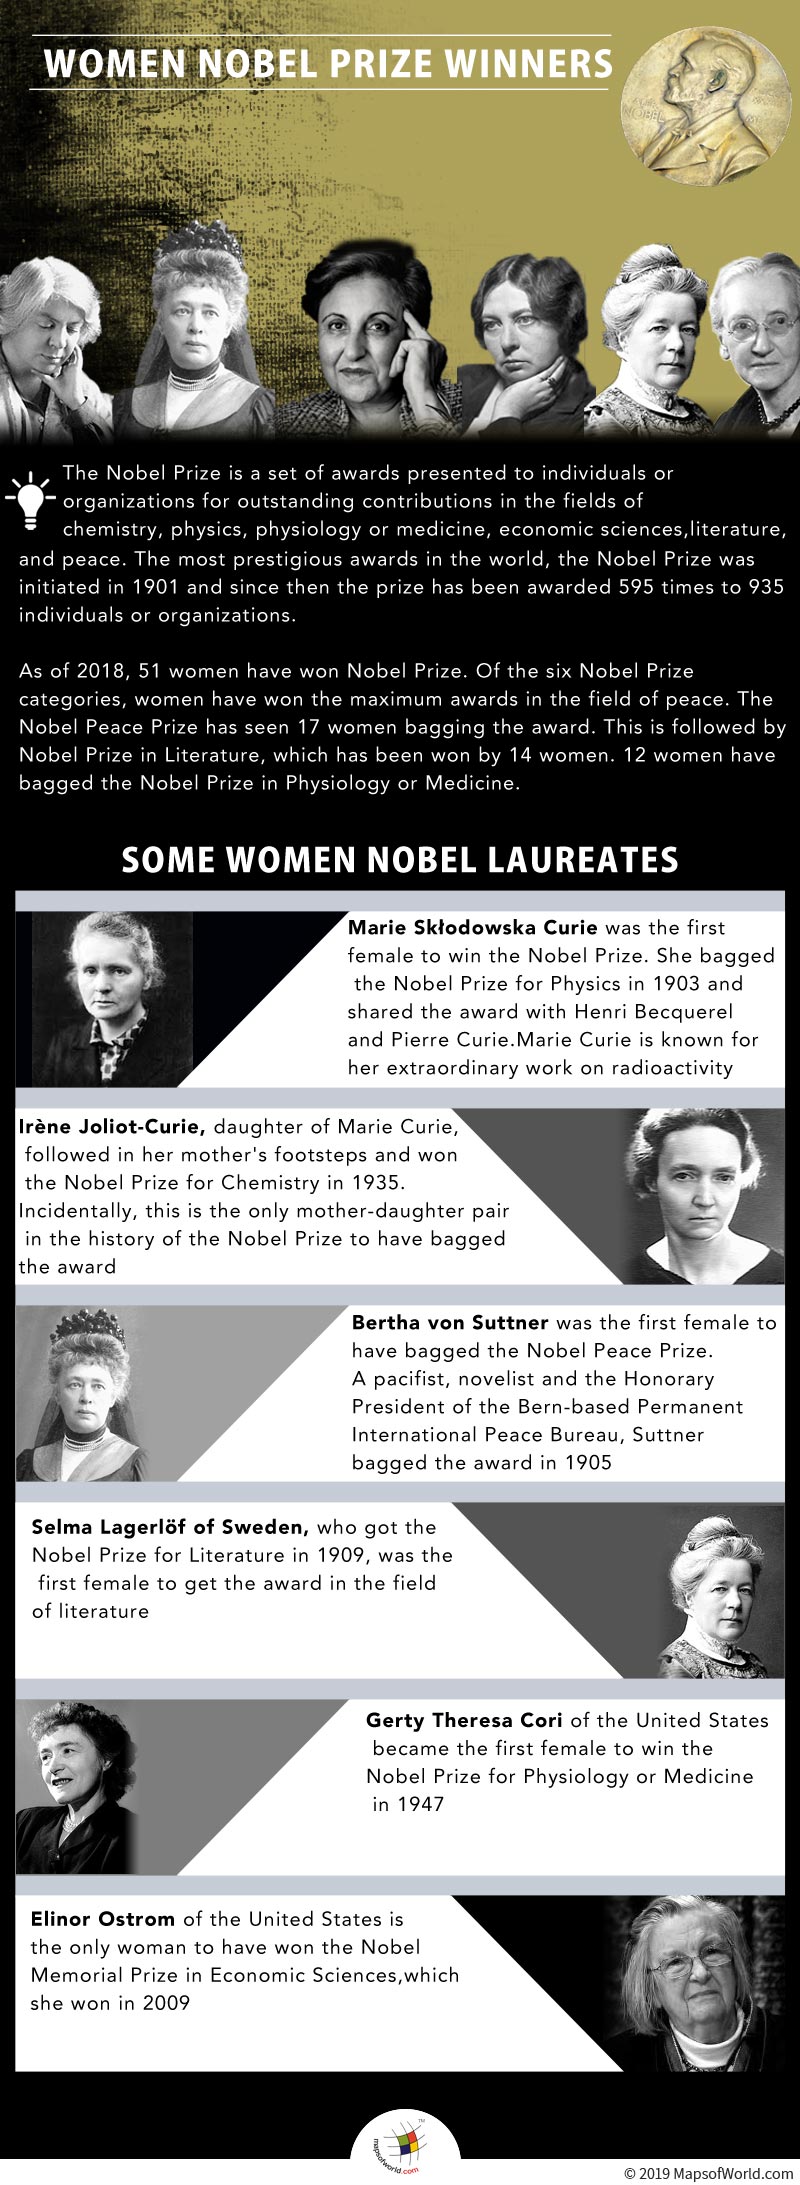 Infographic Giving Details on Women Nobel Prize Winners